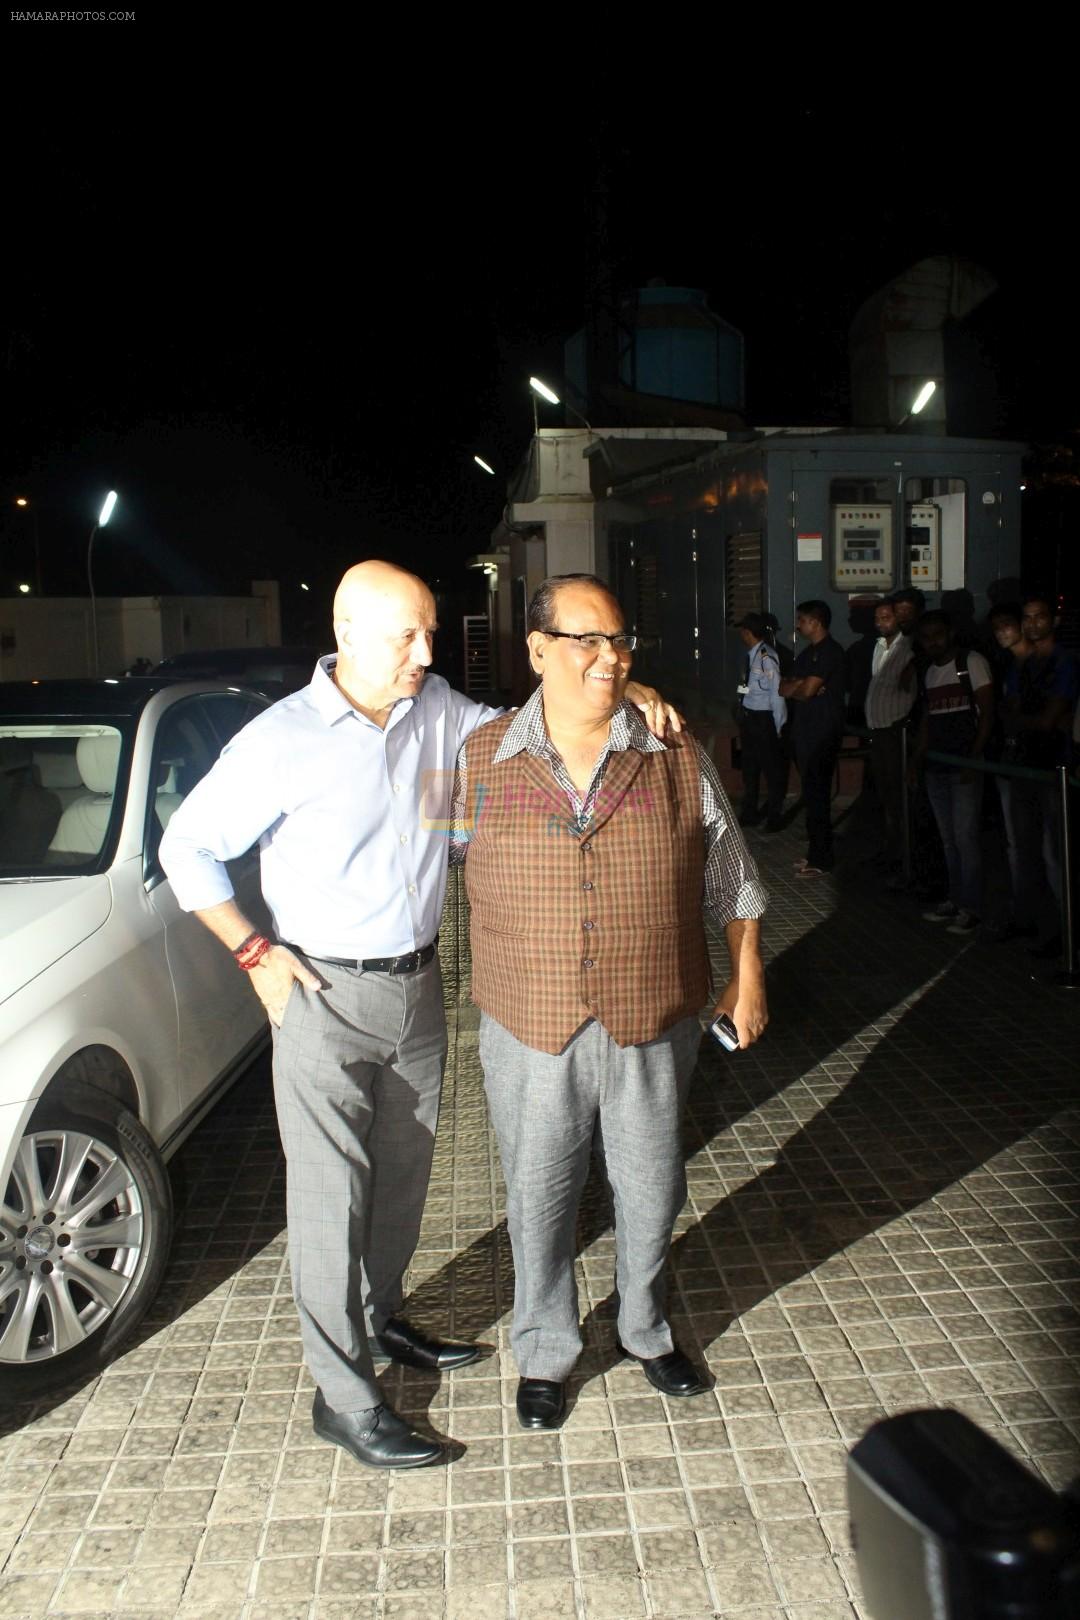 Anupam Kher, Satish Kaushik at the Special Screening Of Film Naam Shabana on 29th March 2017